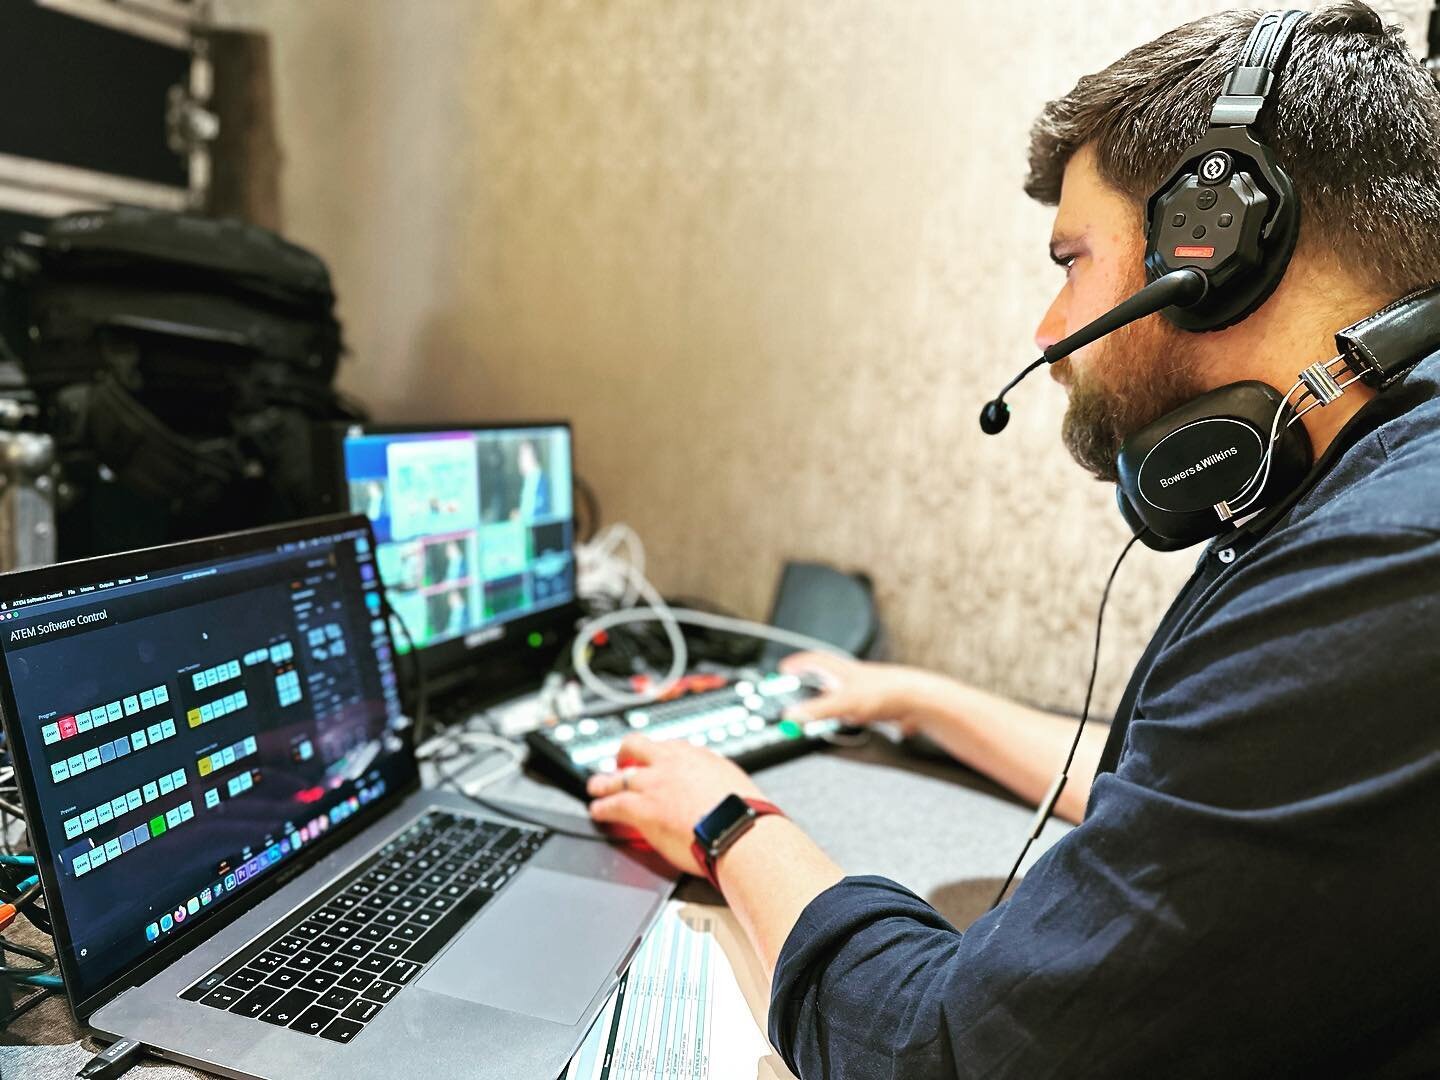 Utilising a compact mobile live streaming kit plus our in-house hosting platform eventstream.online to webcast presentations for a major investment firm in Central London today.  @liveutv solo pro encoders providing highly resilient bonded streaming 